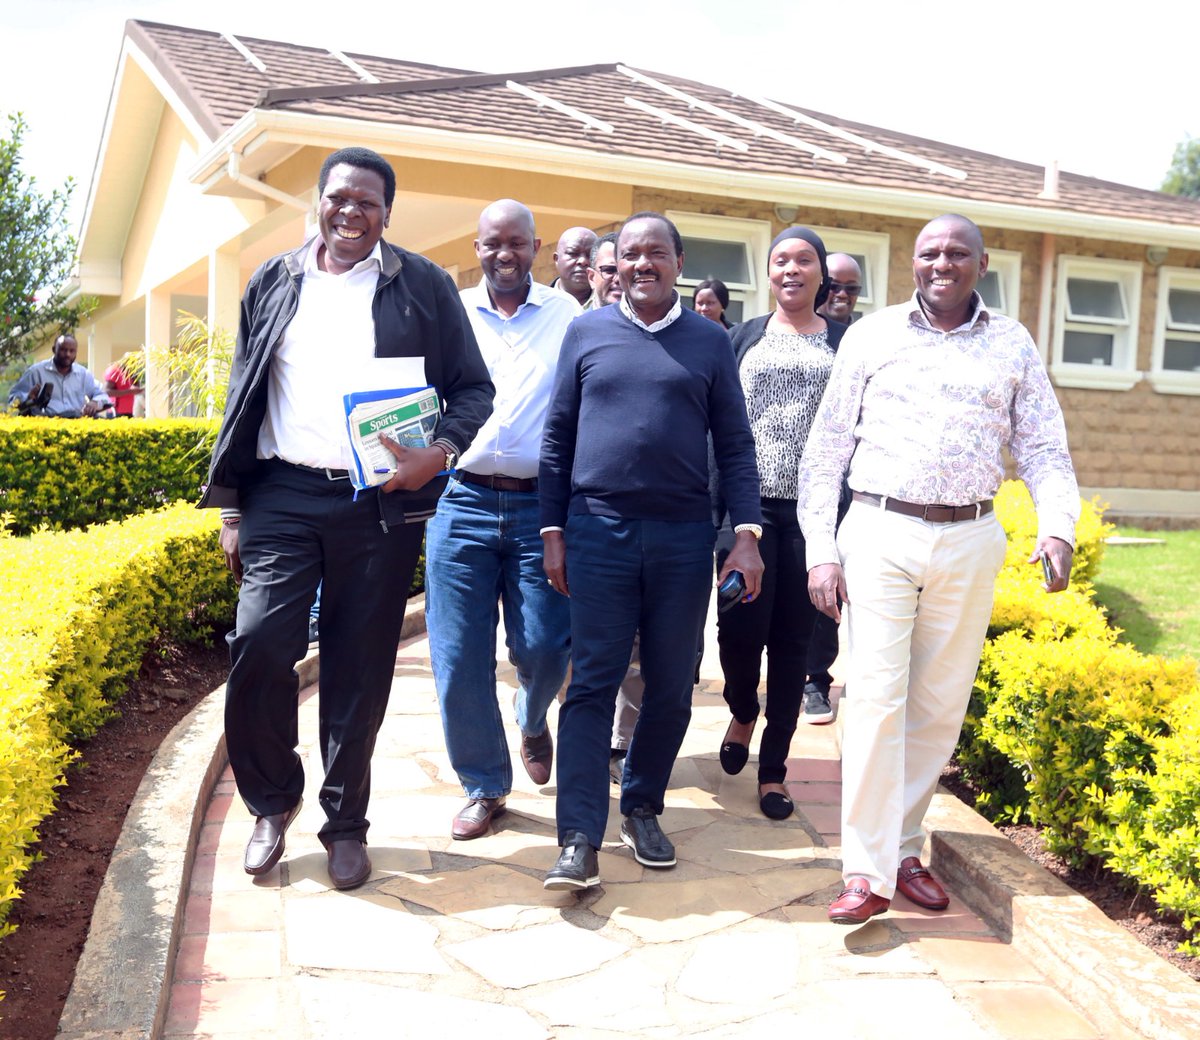 Party Leader @EugeneLWamalwa and the National Dialogue Committee led by @skmusyoka & @KIMANIICHUNGWAH making strides in ensuring the key agenda issues including the cost of living are fully addressed for the interest of Kenyans. #MwamkoMpya